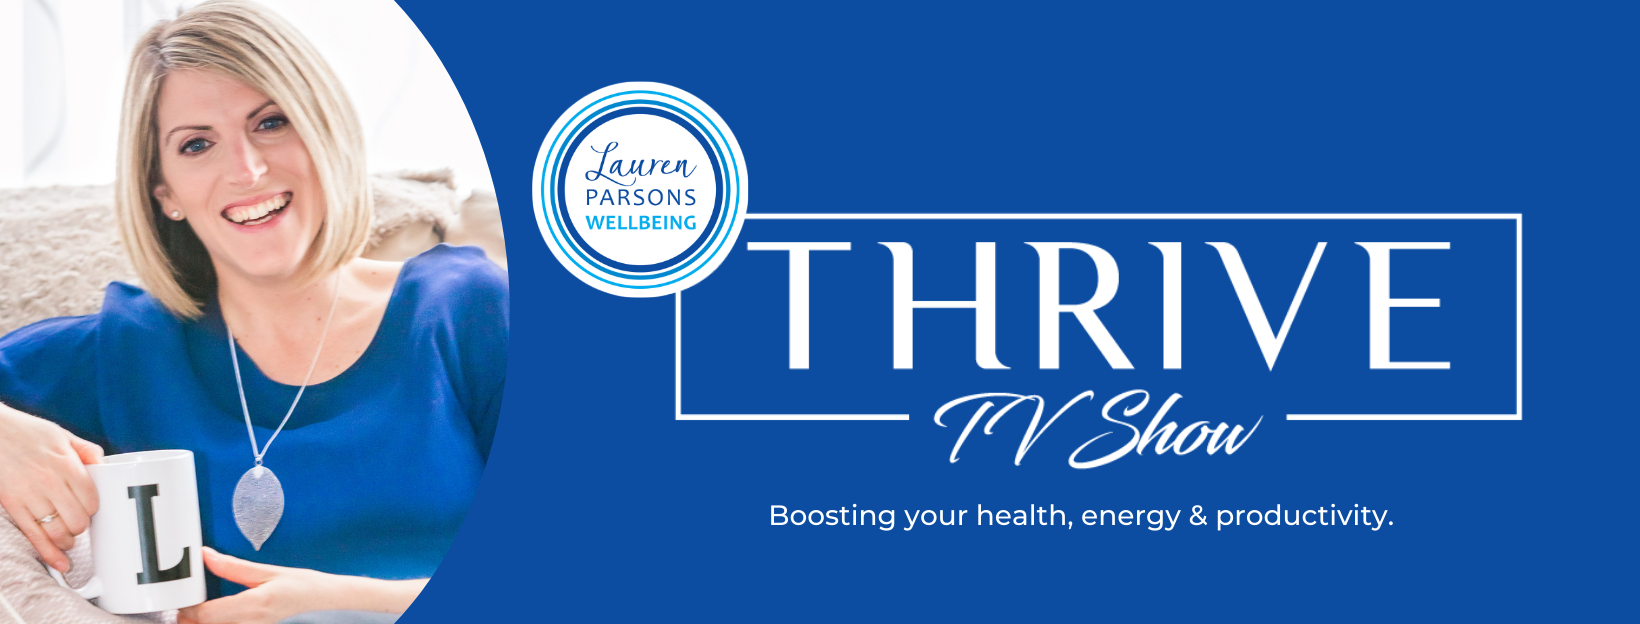 Lauren Parsons Wellbeing Specialist THRIVE TV Show Podcast on Health and Wellbeing